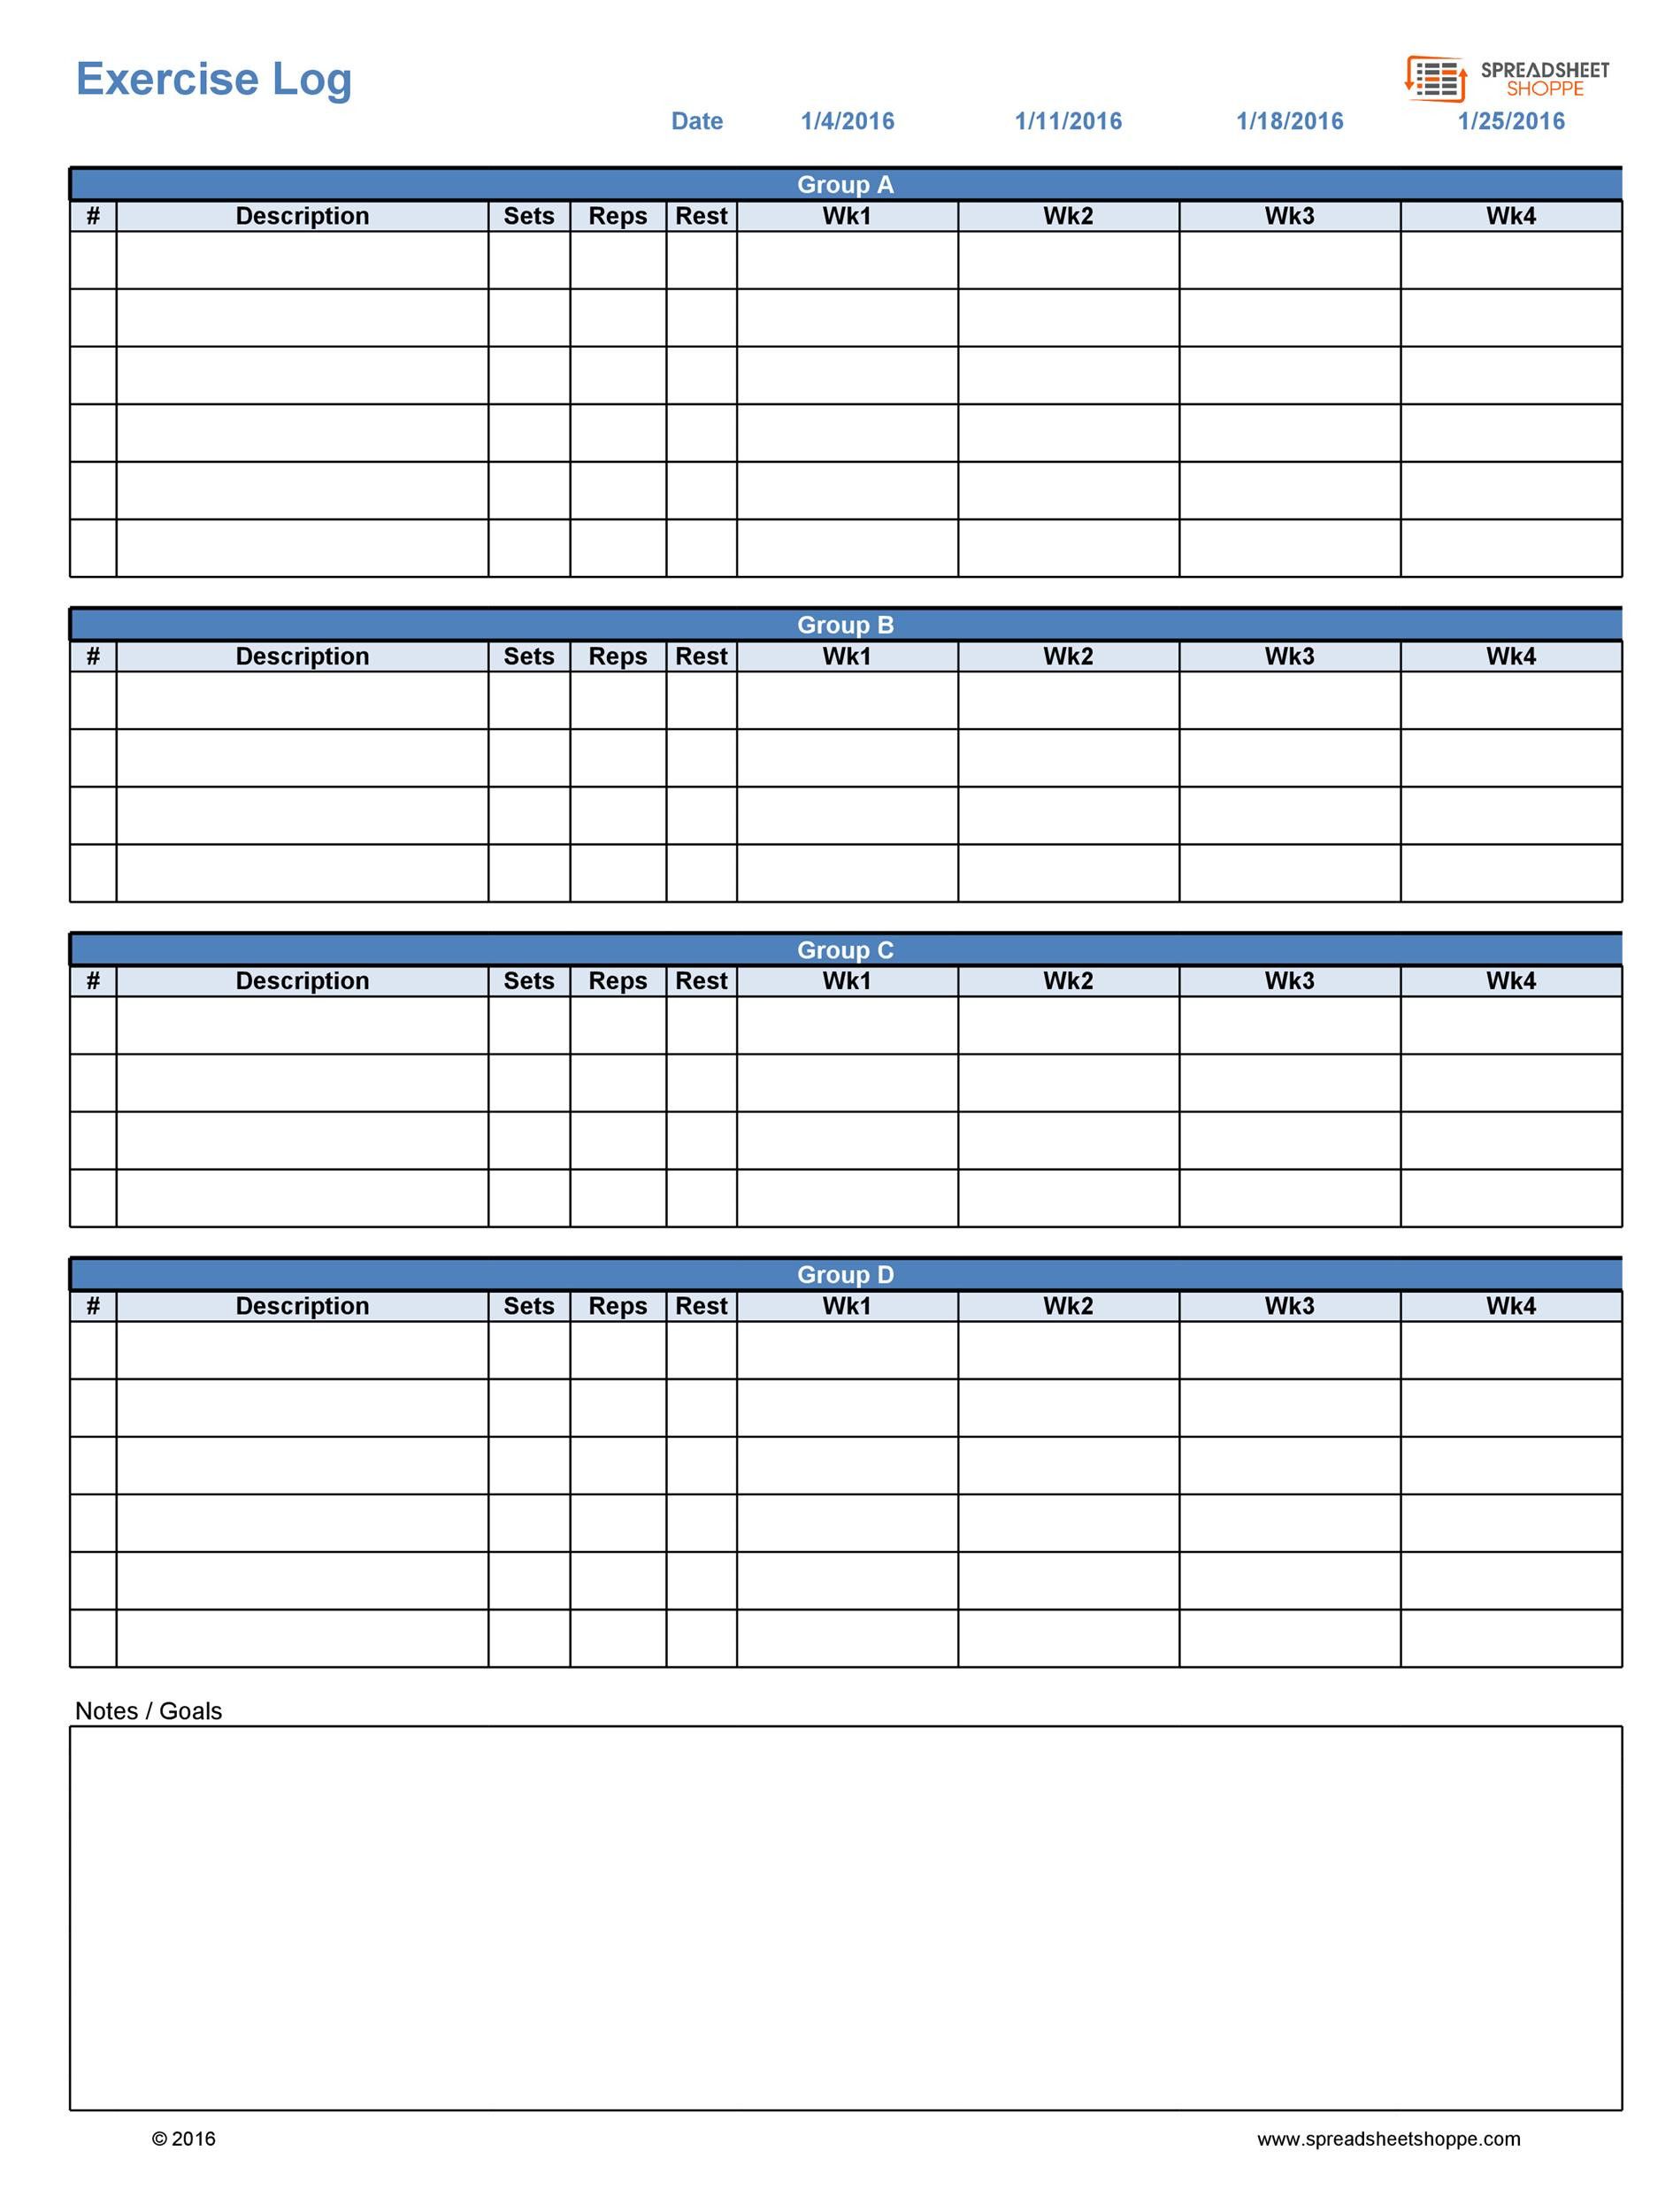 propsed calendar for work outs on excel 26